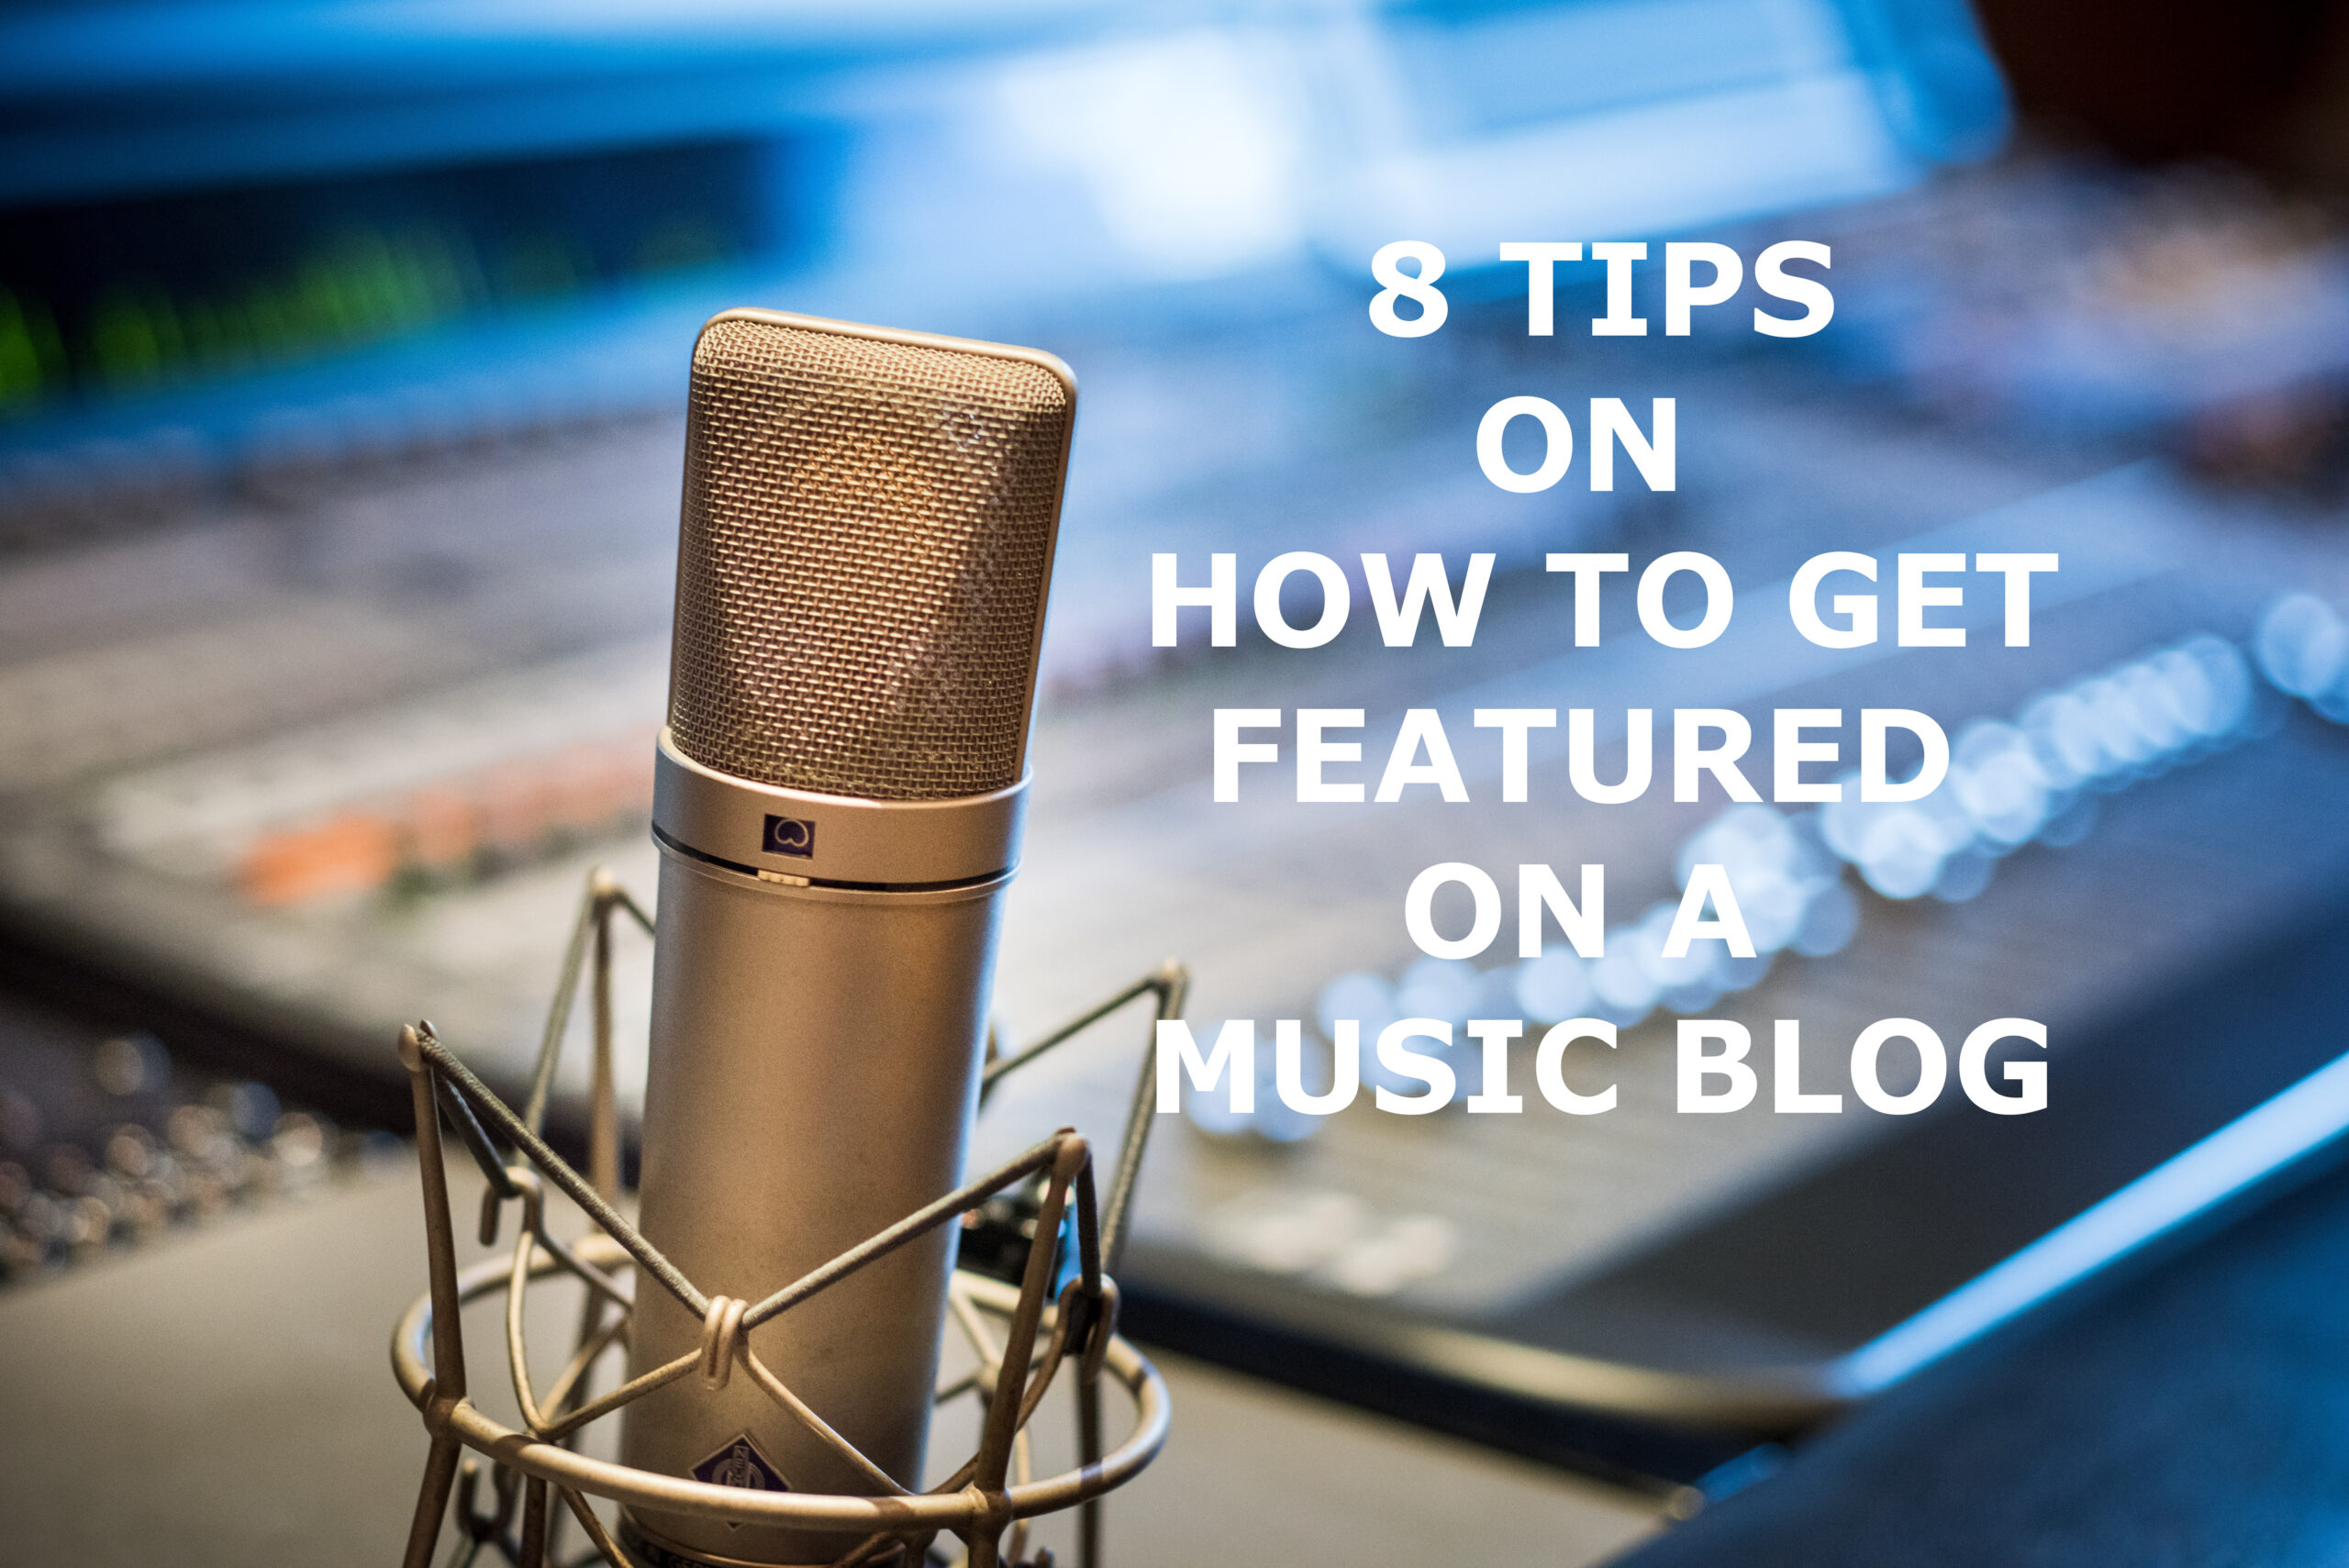 8 Tips on How to Get Featured on a Music Blog